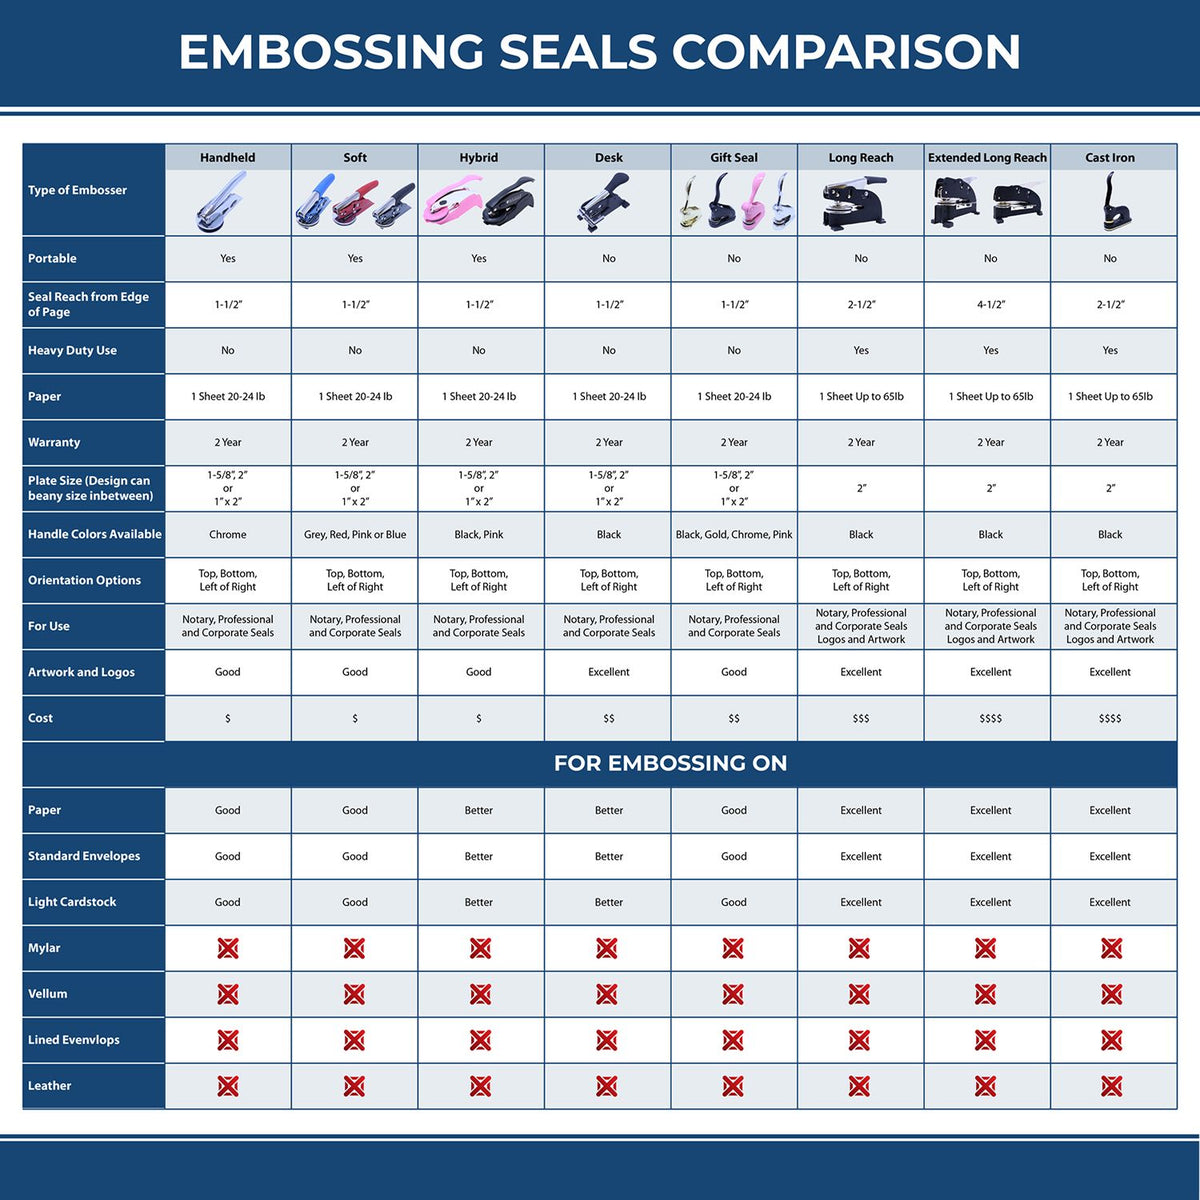 A comparison chart for the different types of mount models available for the Soft West Virginia Professional Engineer Seal.